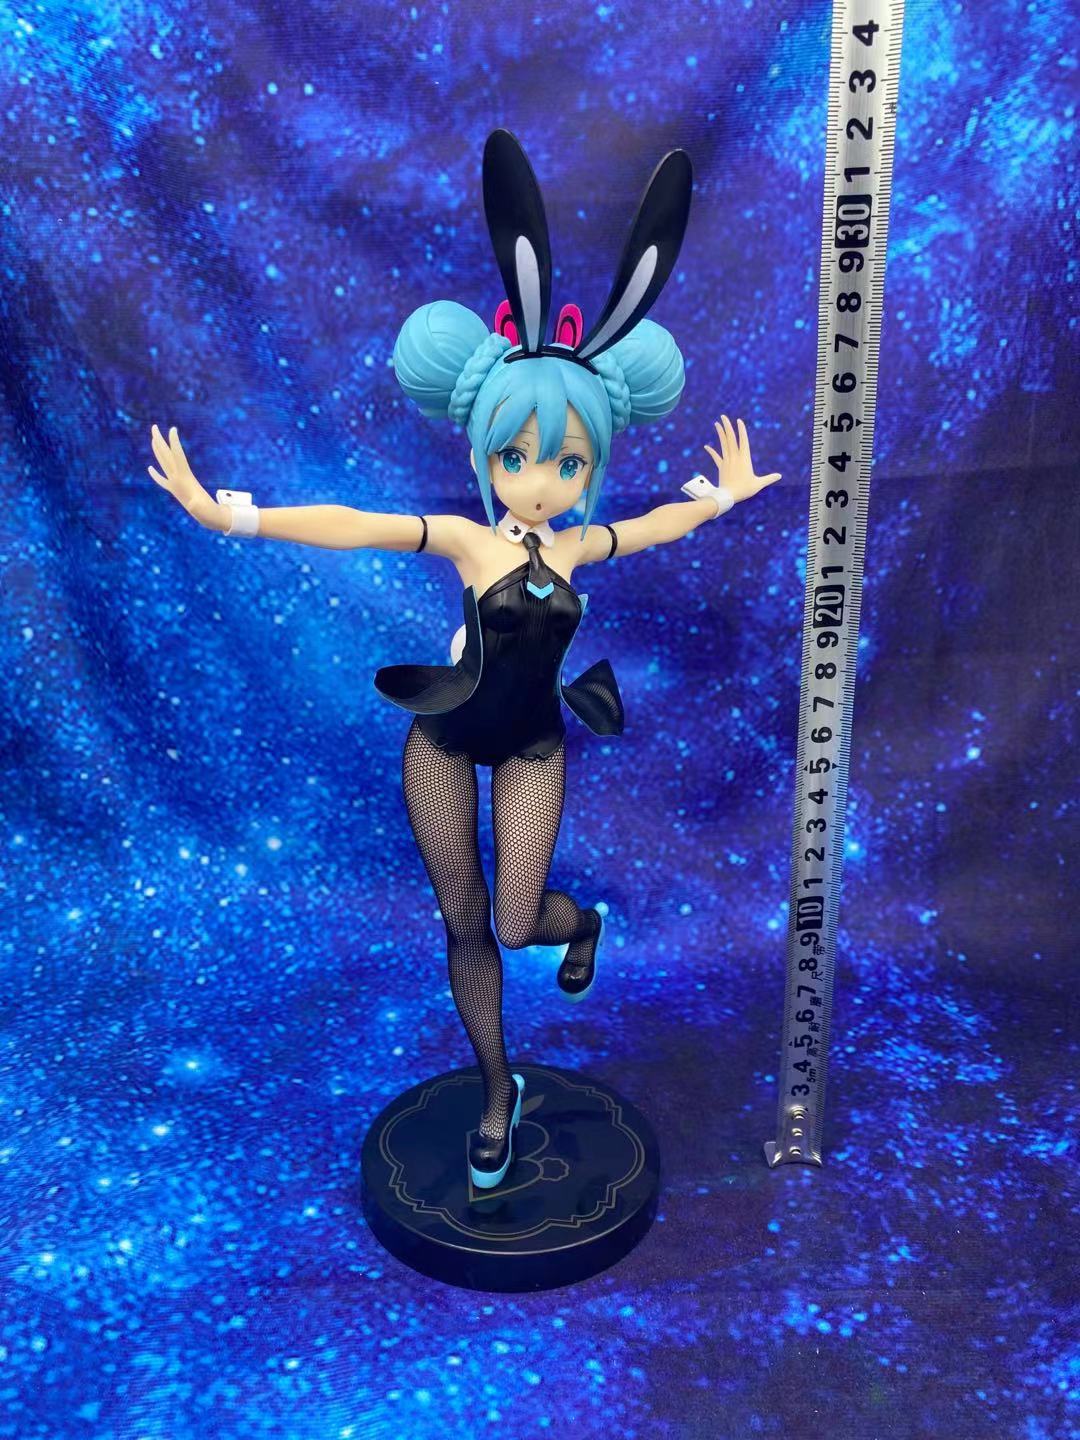 101 # Brand New Box Without Special FeaturesGenuine FuRyu Hatsune Miku Bunny Girl Special Edition Scenery Garage Kit Black rabbit real silk Rabbit ear